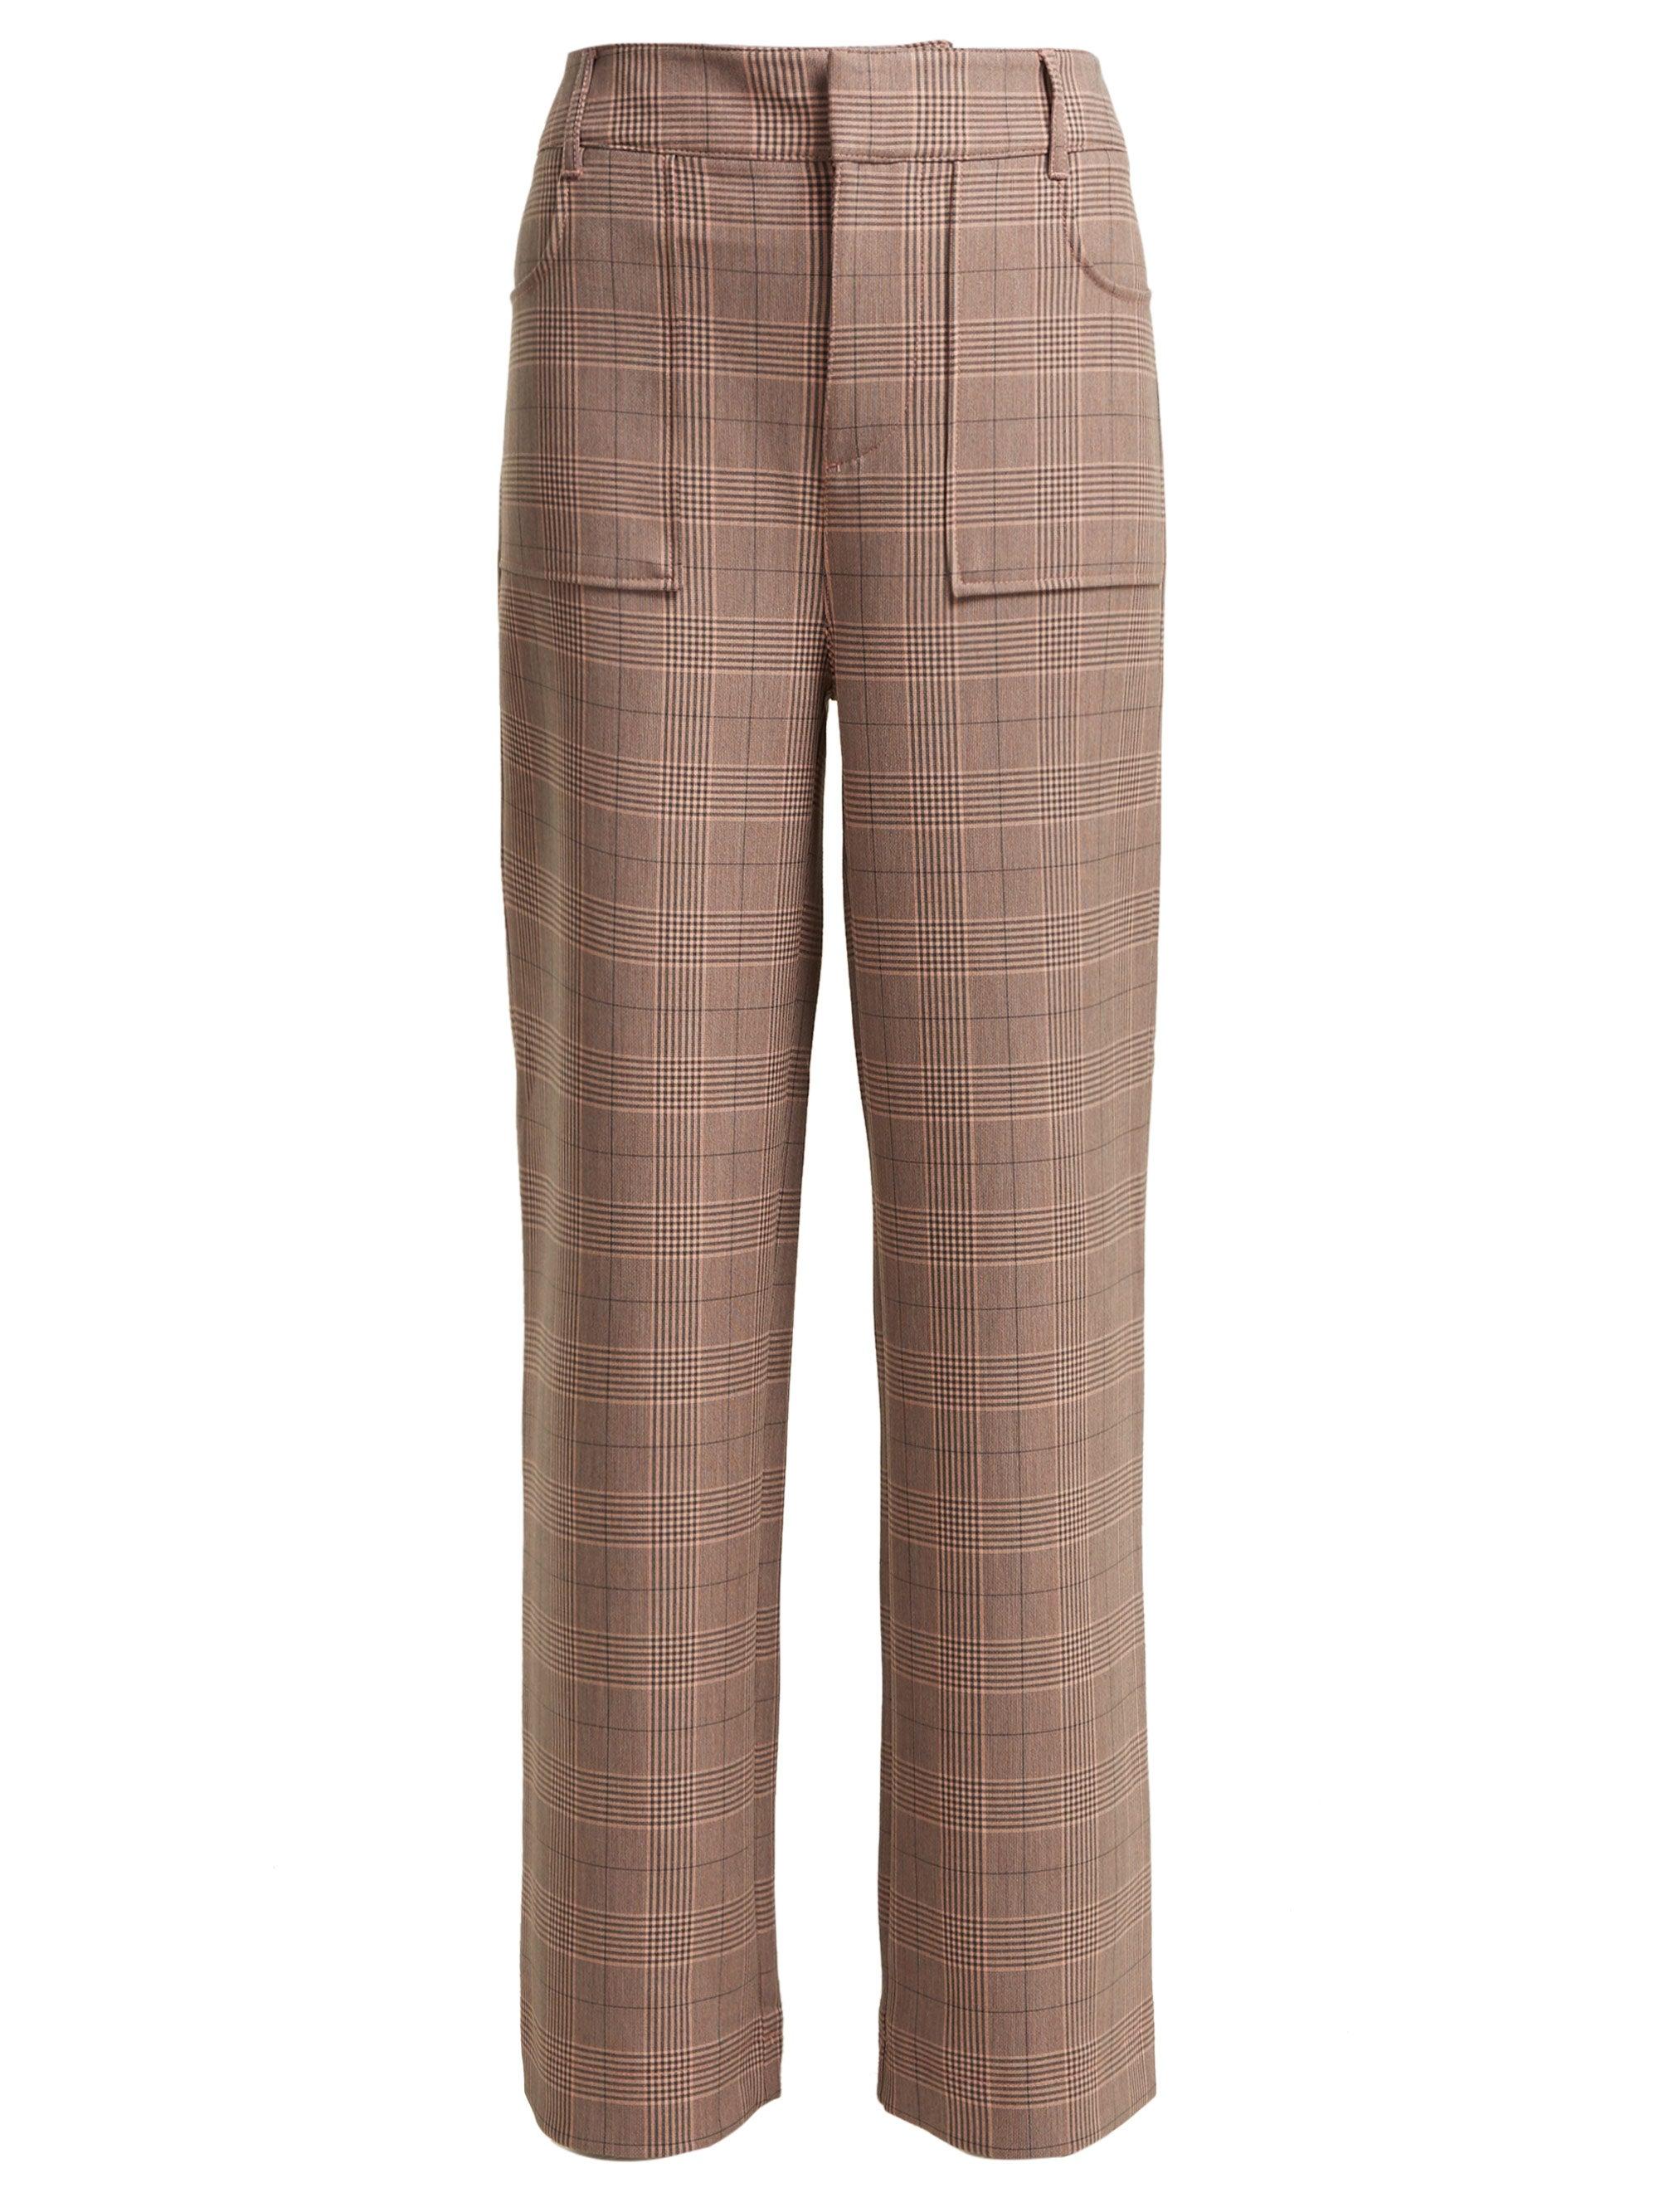 Ganni Hewitt Checked Trousers in Brown - Lyst